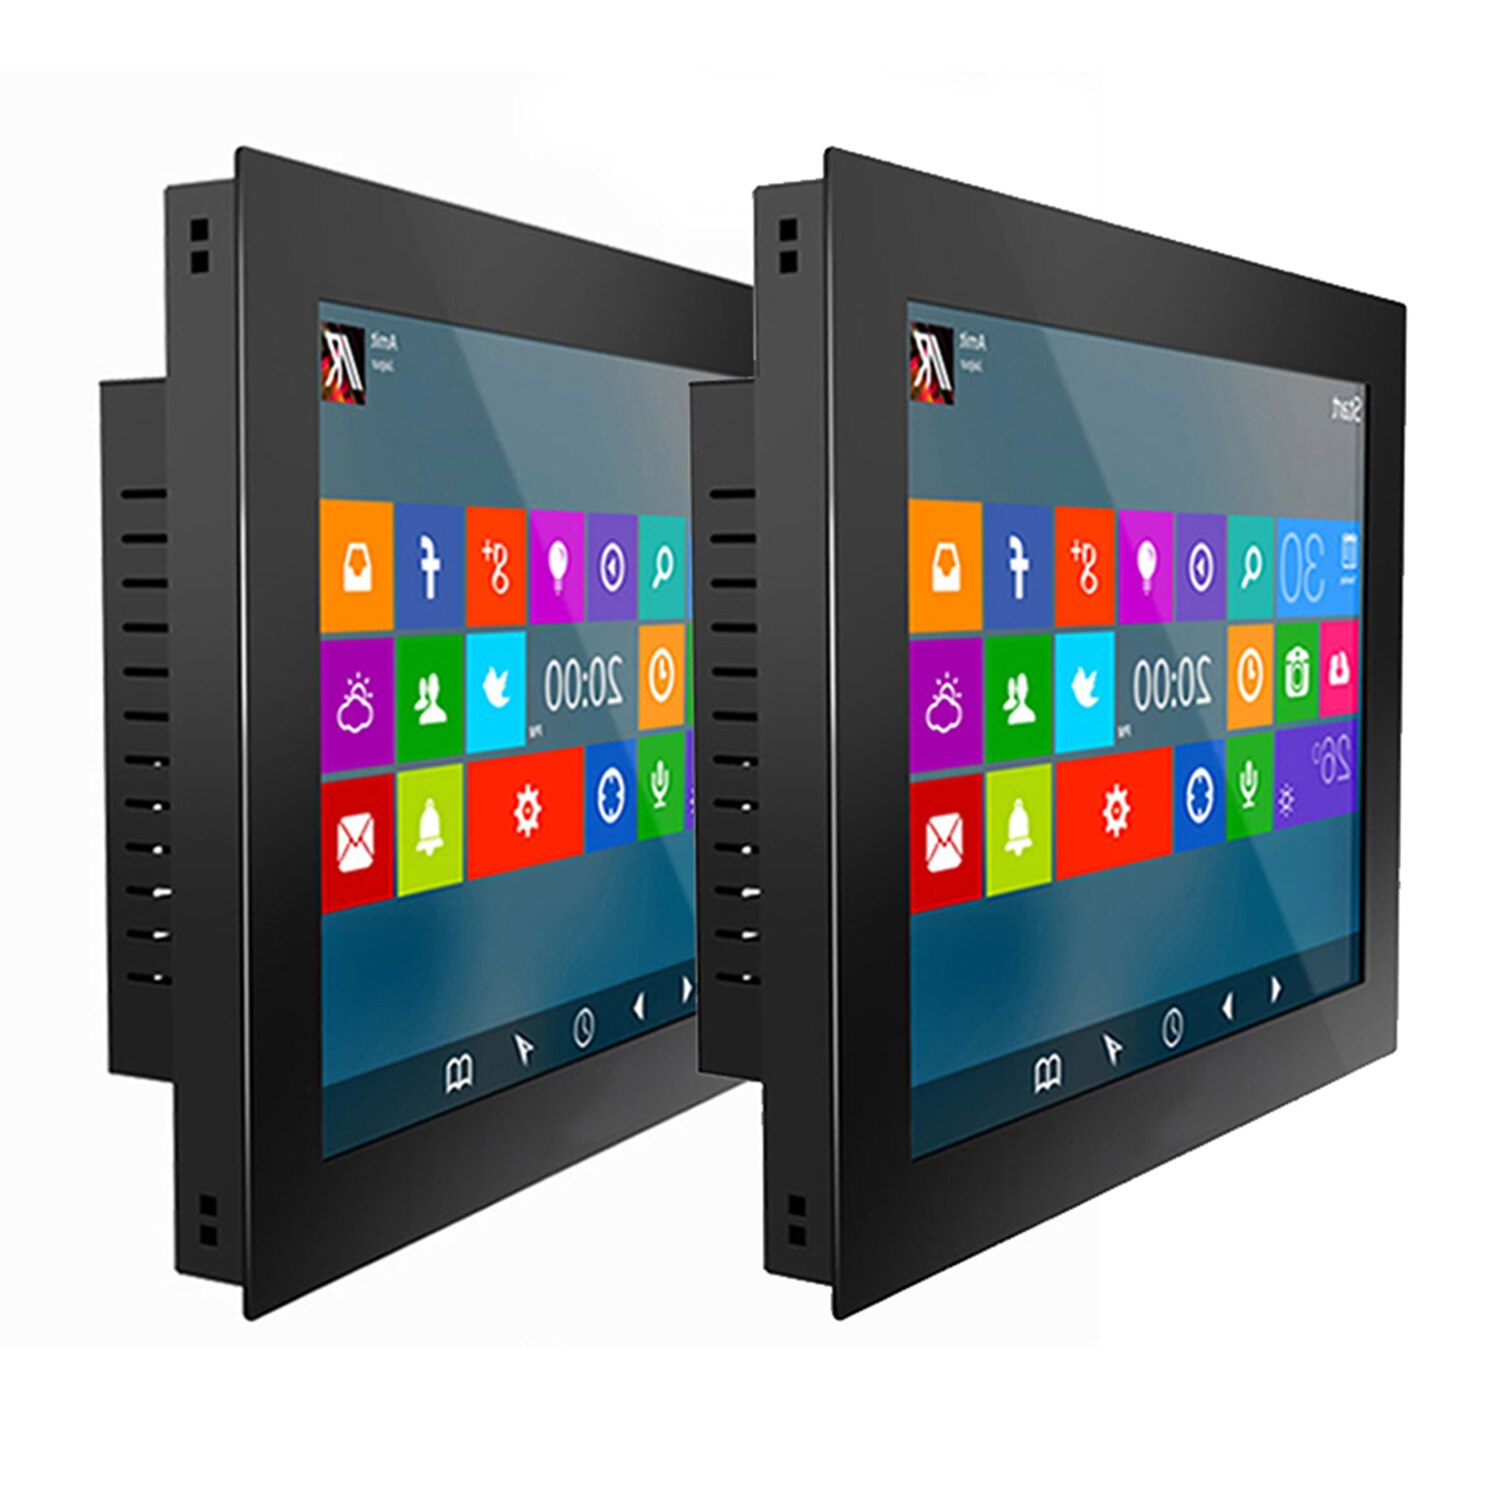 17 19 21Inch Embedded IPC Resistive Touch Mini Tablet PC Intel J1800/J1900/i3/i5/i7 Industrial All-in-One computer for win10 Pro